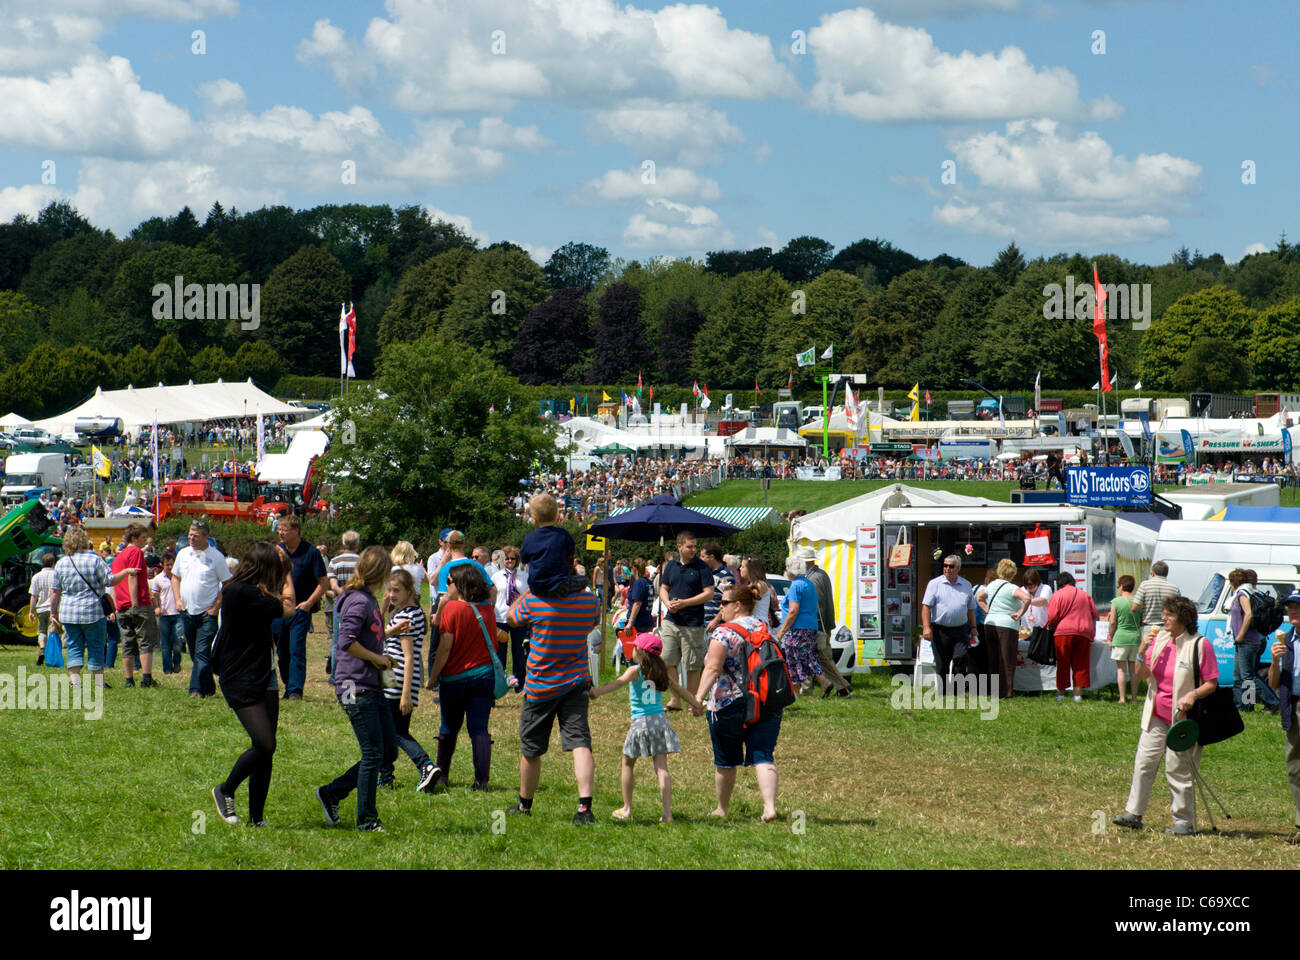 General view of the scene at a country show in Mid Devon Stock Photo